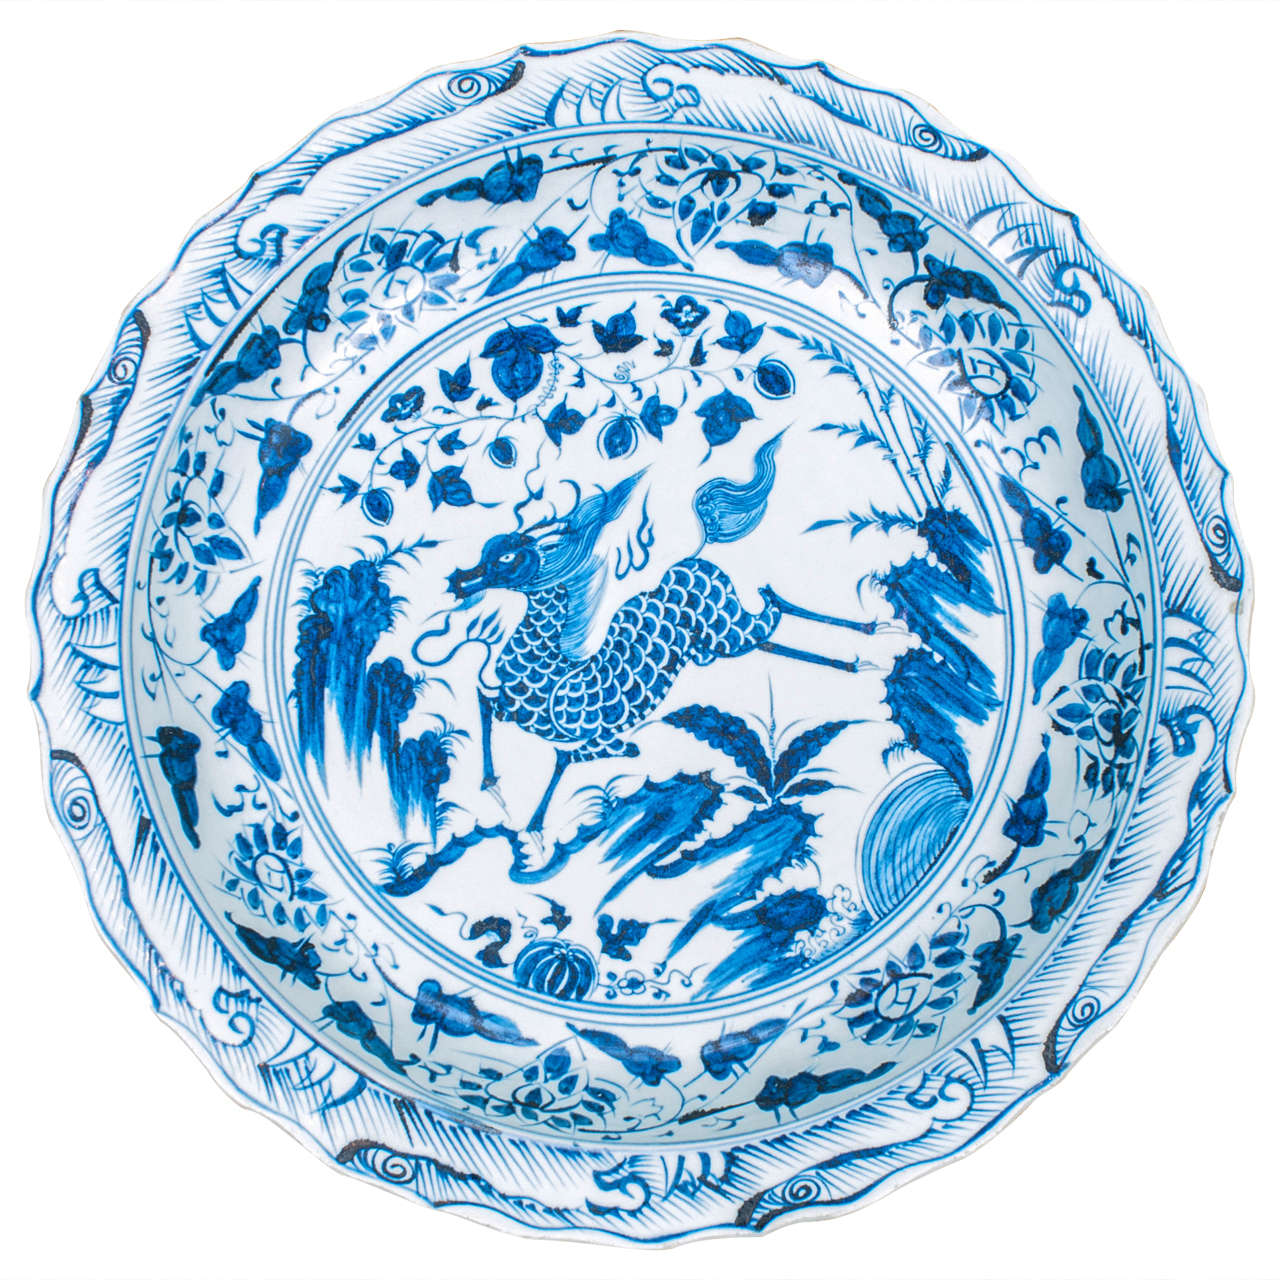 Monumental Blue and White Chinese Porcelain Charger